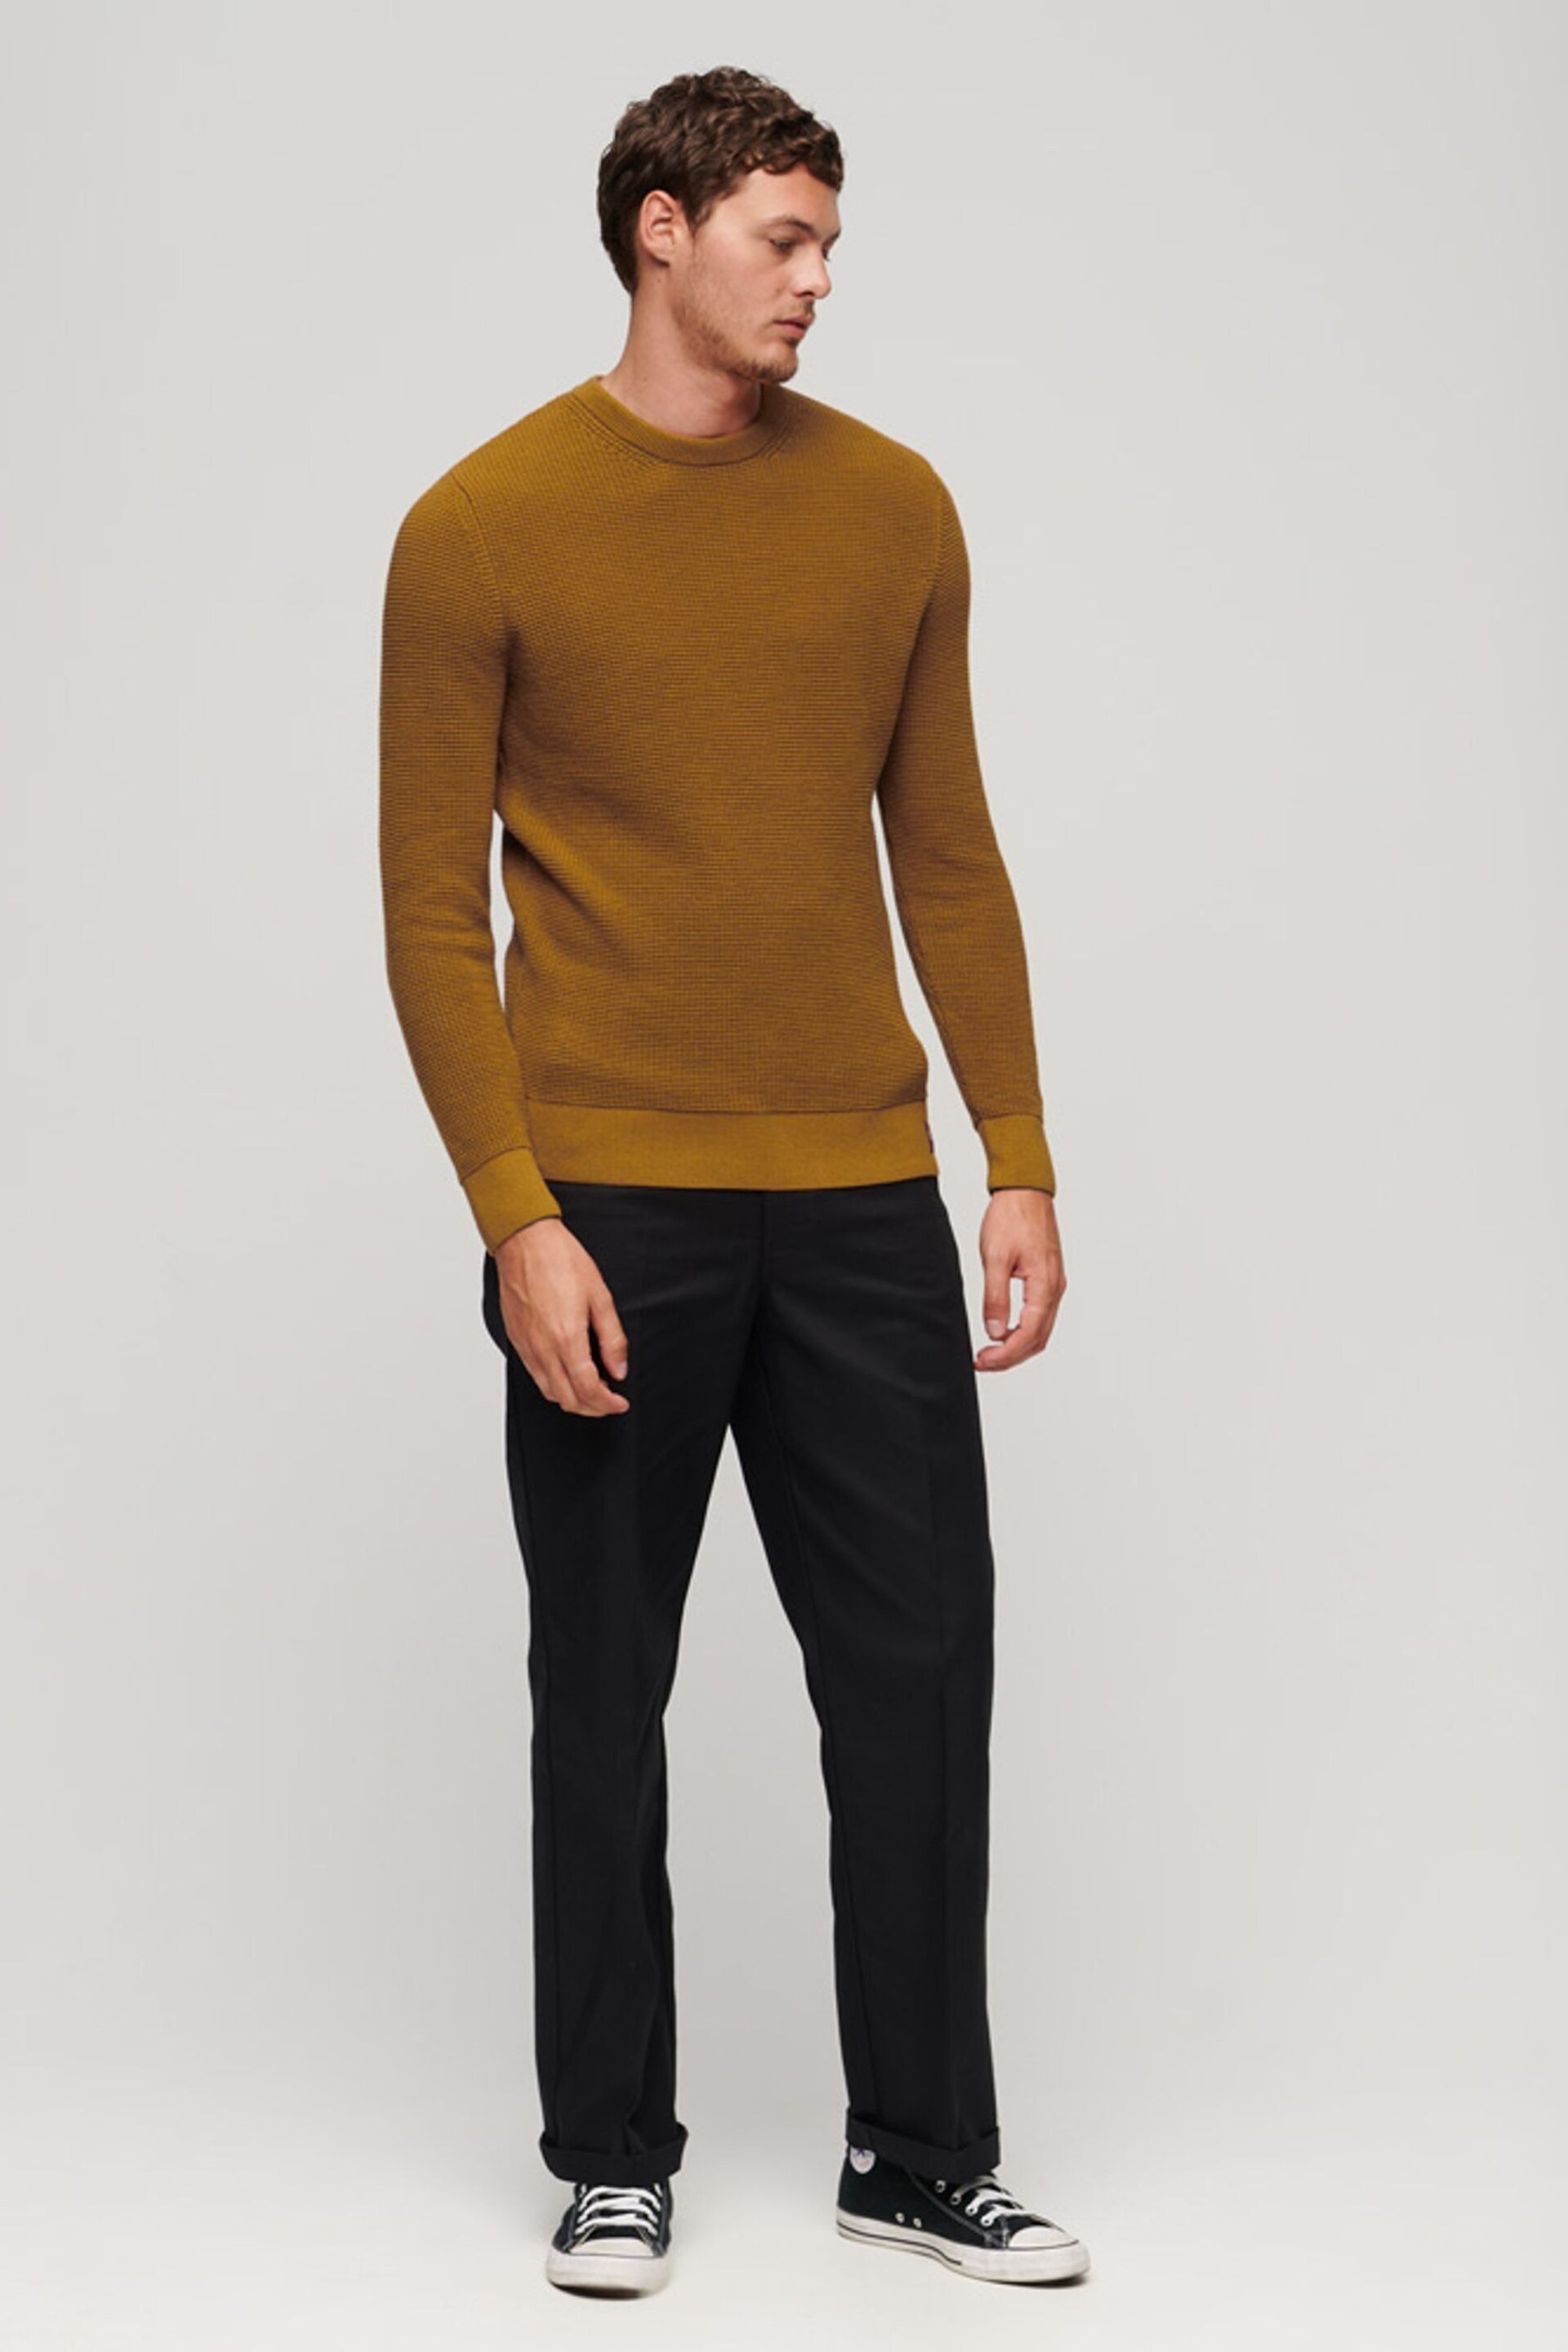 Superdry Musturd Yellow Textured Crew Knit Jumper - Image 2 of 6